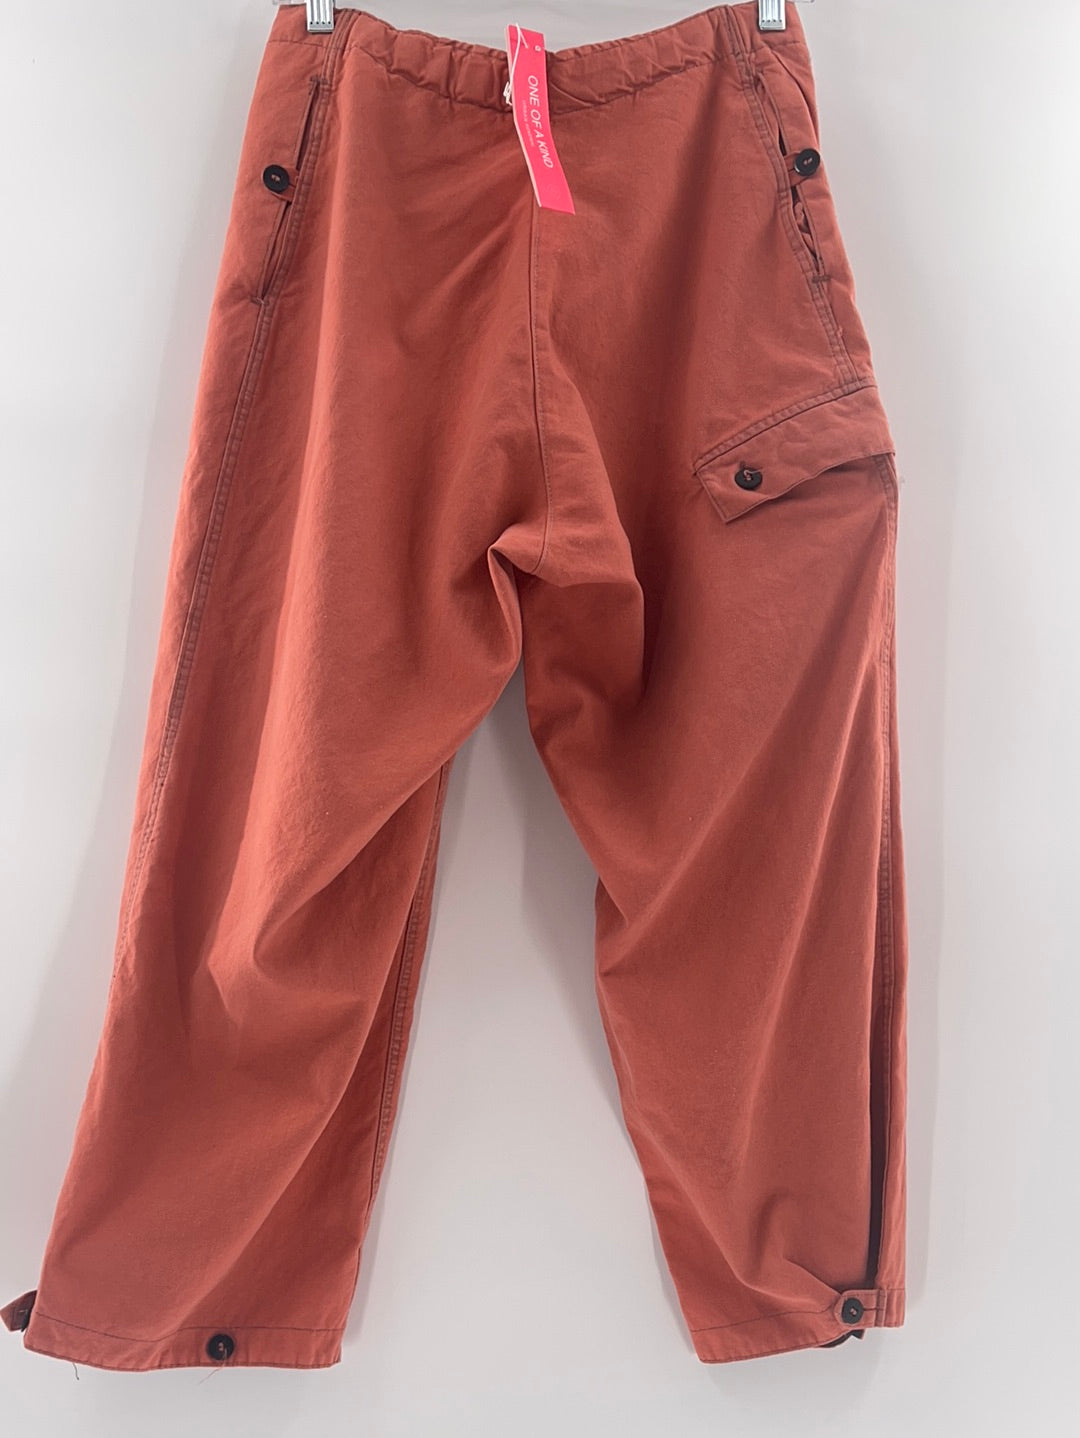 Urban Outfitters Renewal Vintage Piece Pants